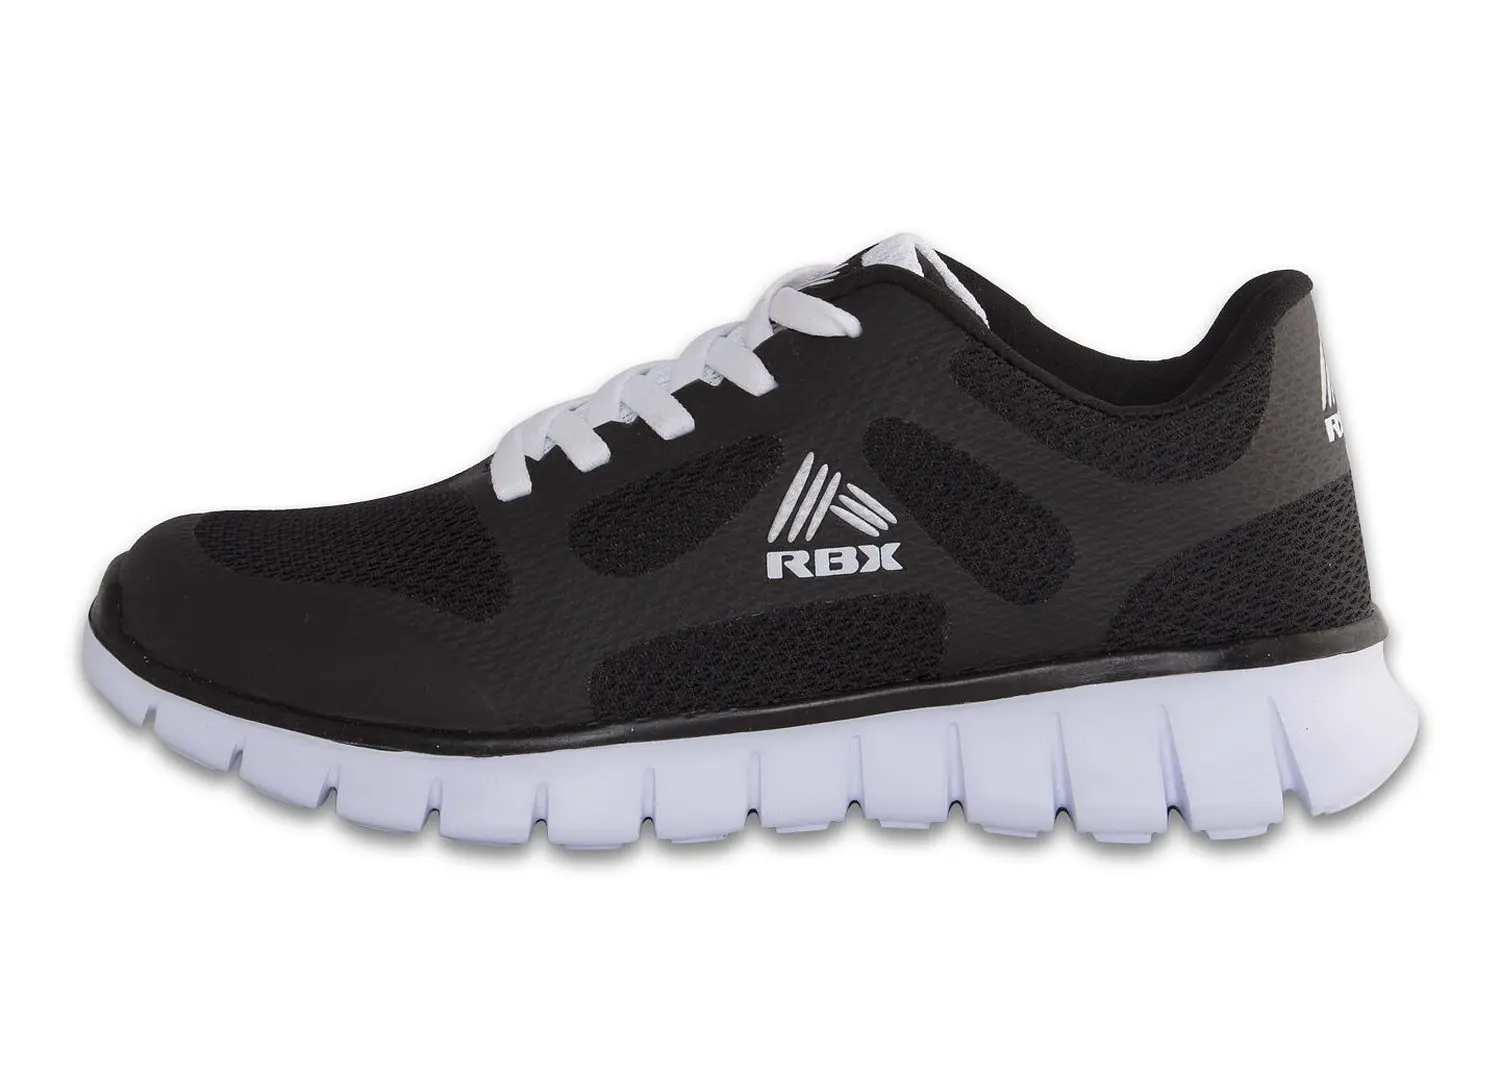 rbx running shoes